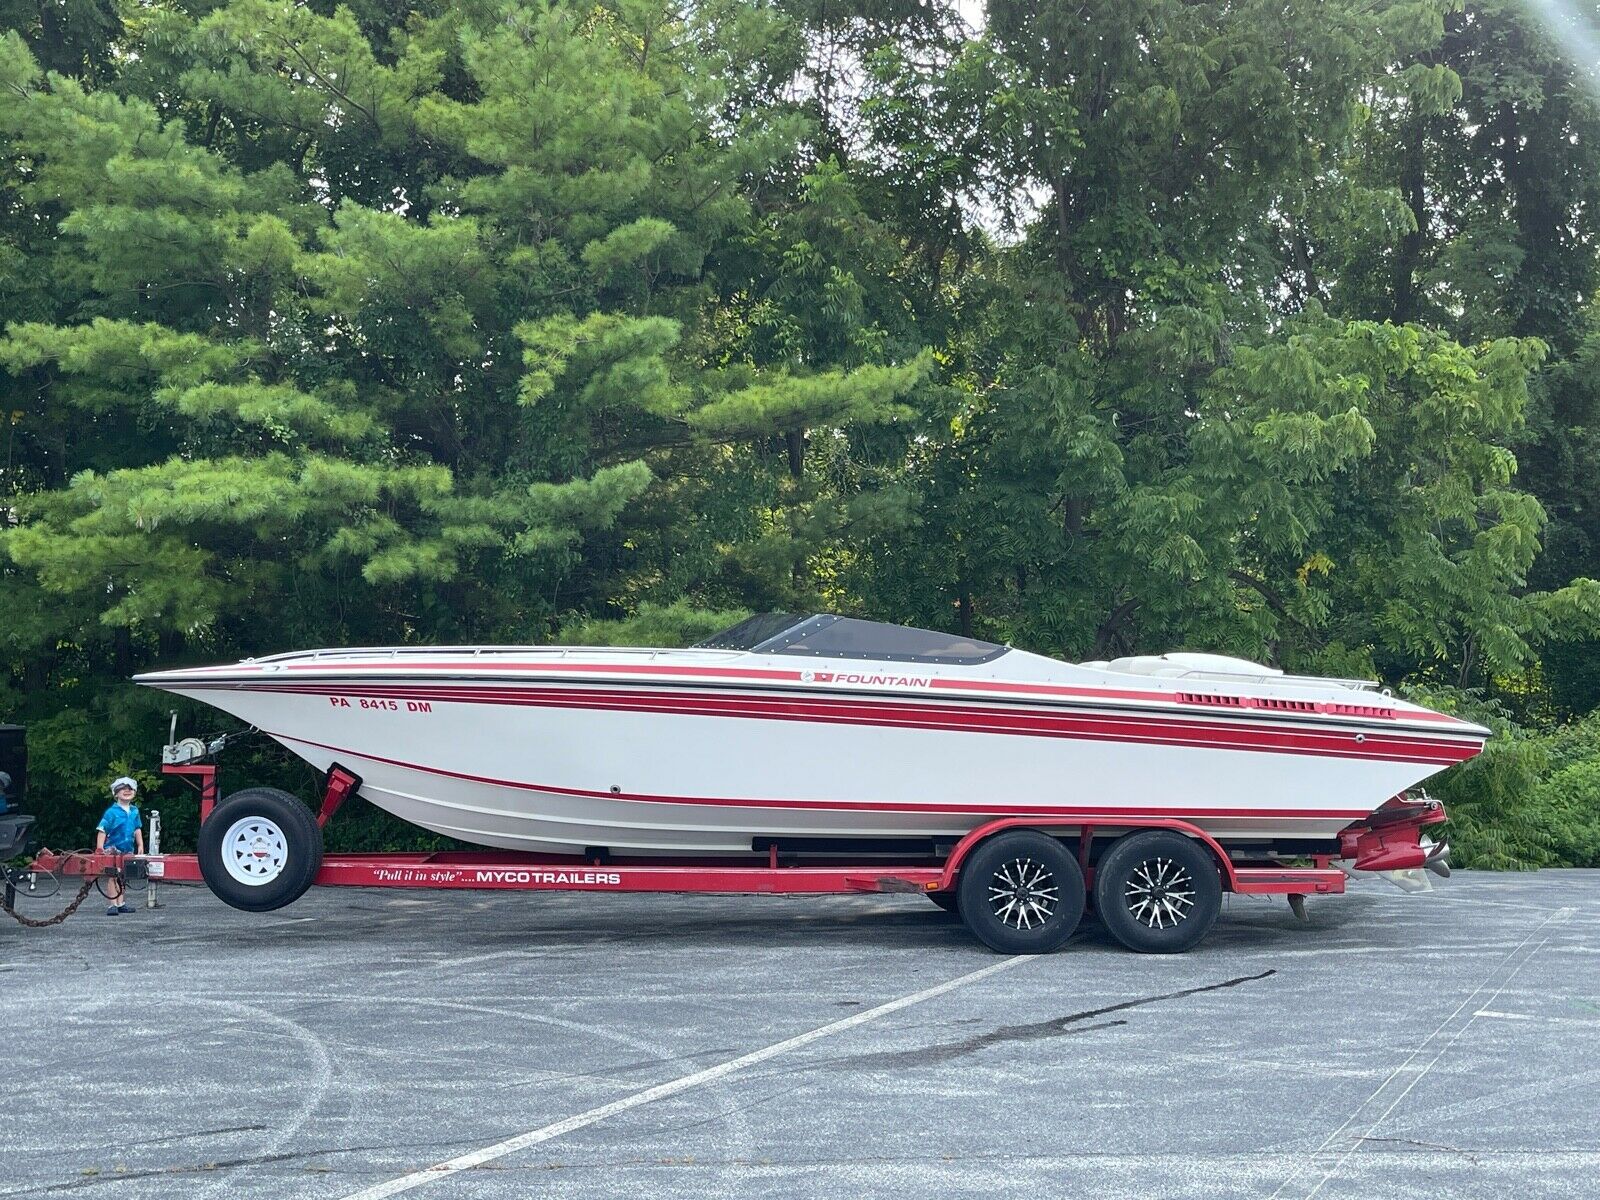 1990 Fountain Fever 29 Twin 454 BBC Supercharged Blowers Rebuilt Speedboat